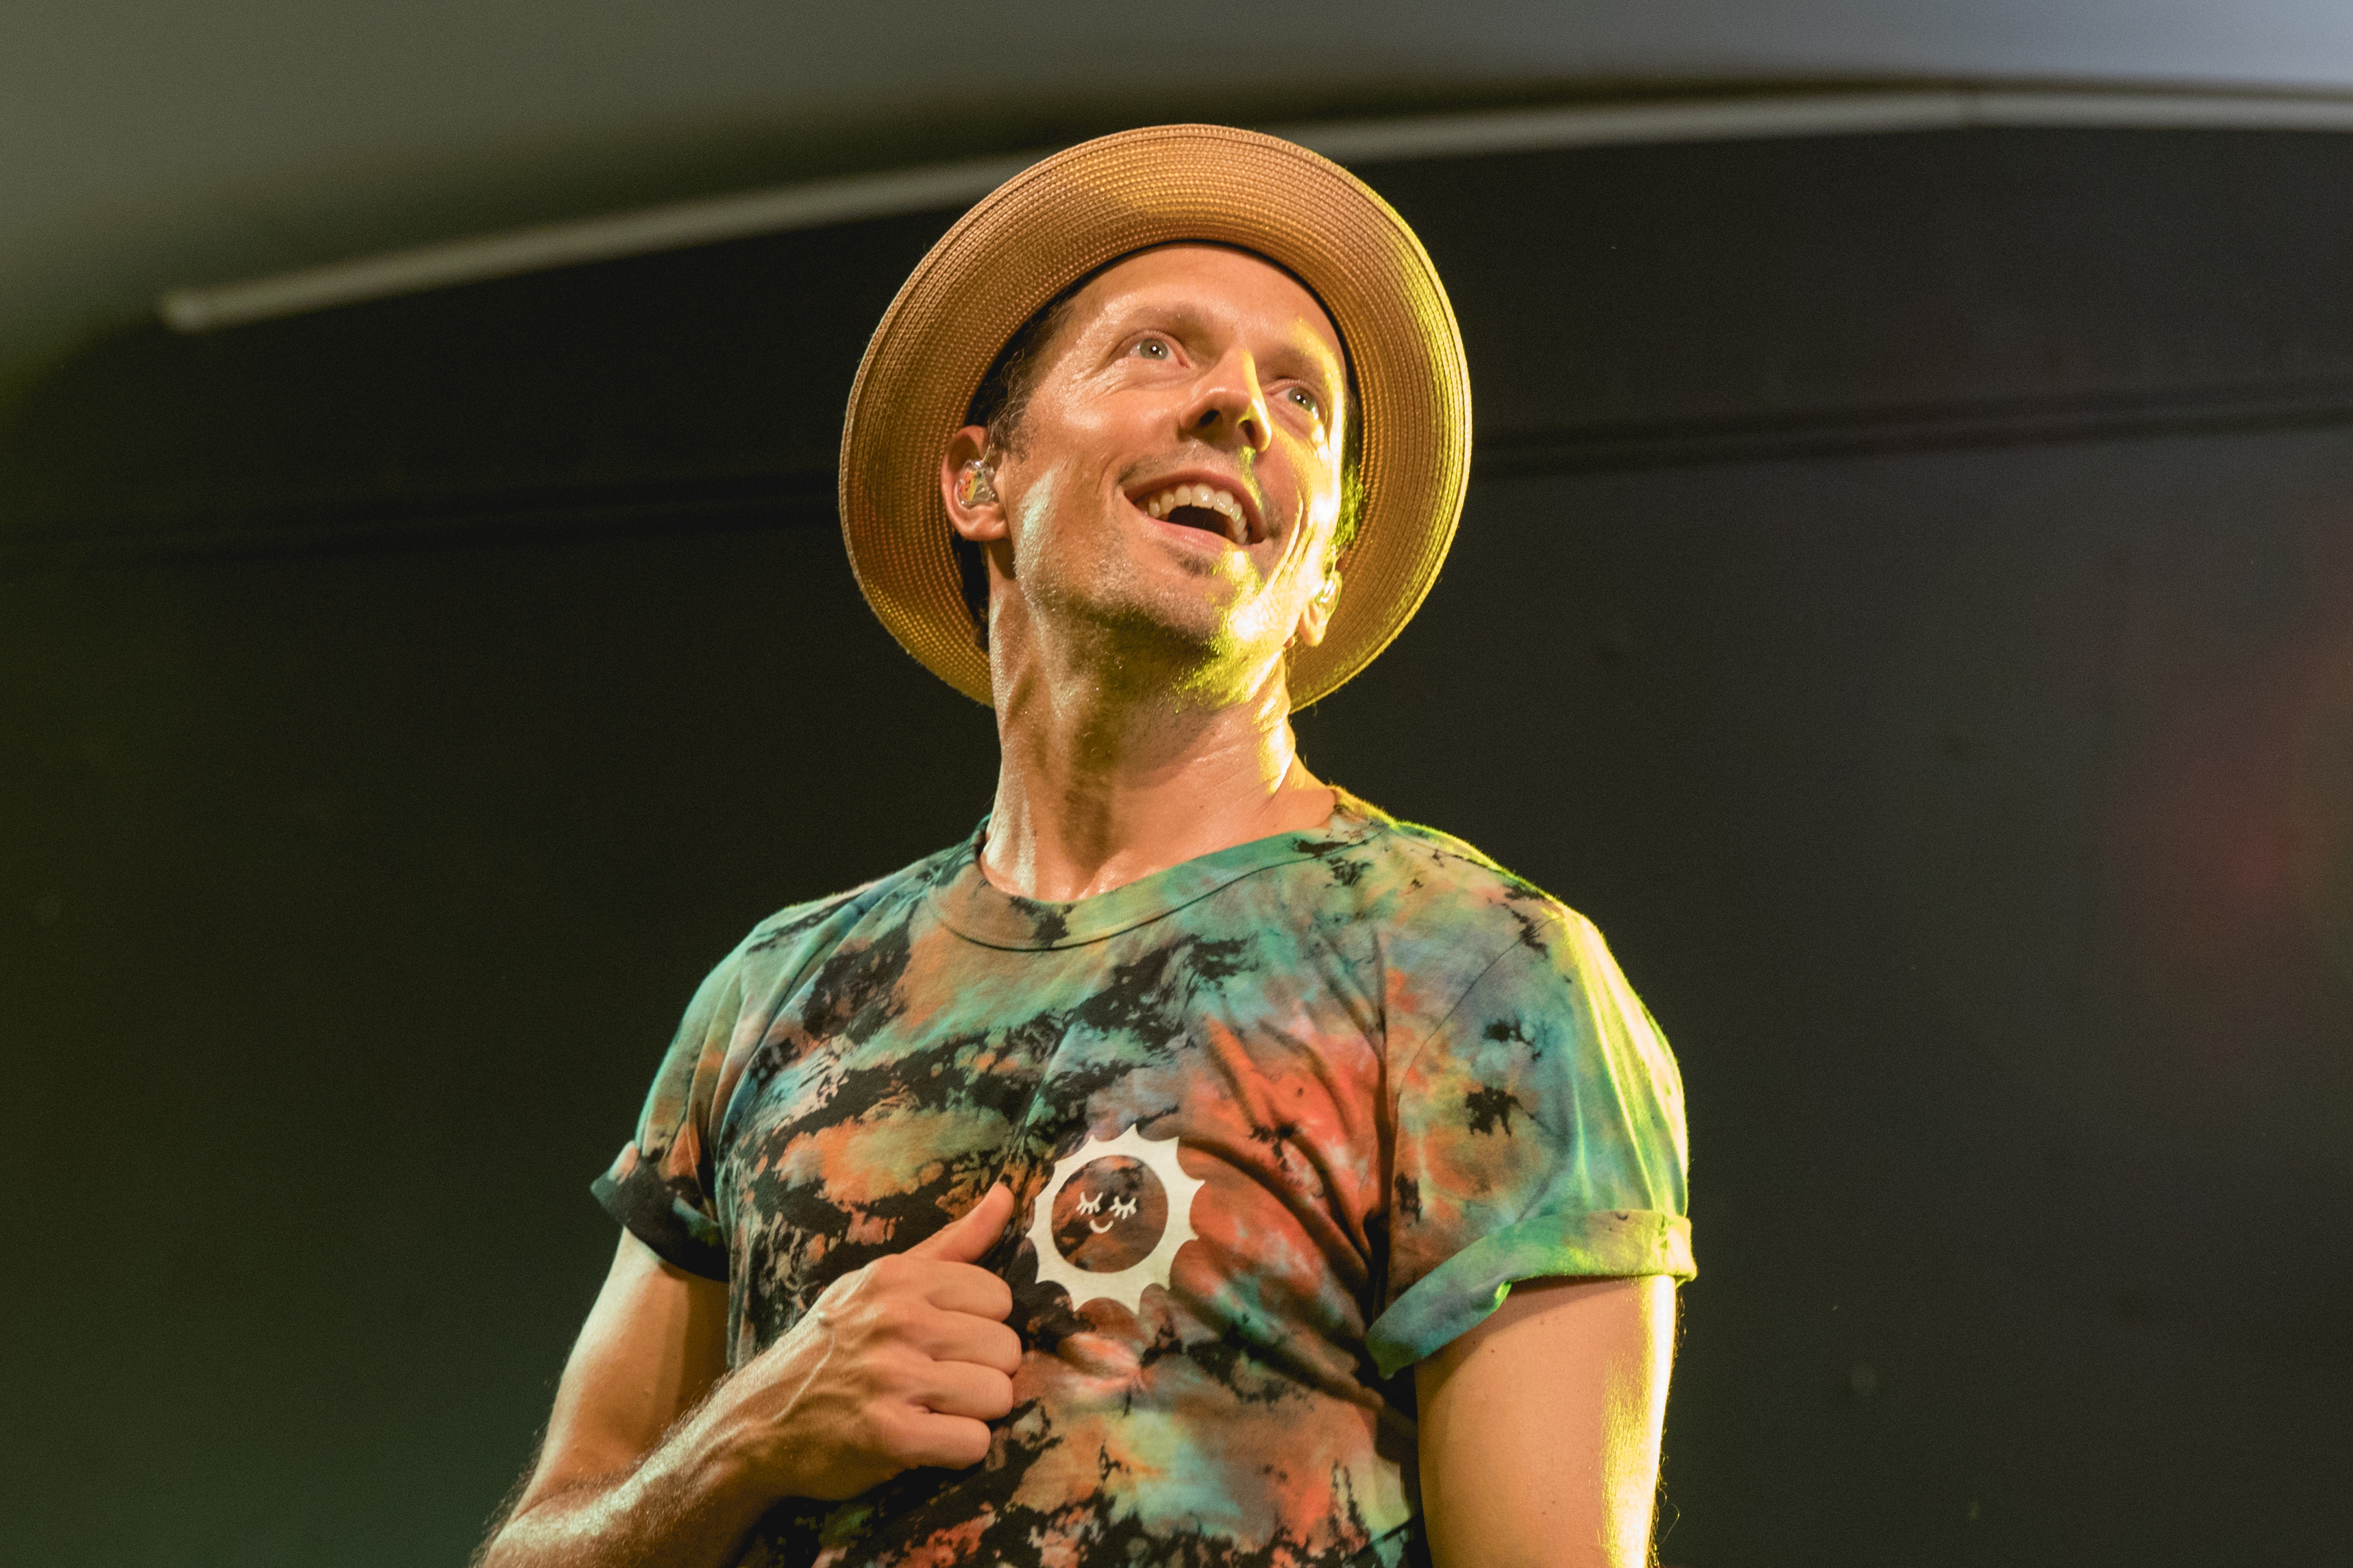 Jason Mraz performs in concert during the Look For The Good Live! Summer Tour at Stubb's Waller Creek Amphitheater on July 30, 2021, in Austin, Texas. | Source: Getty Images